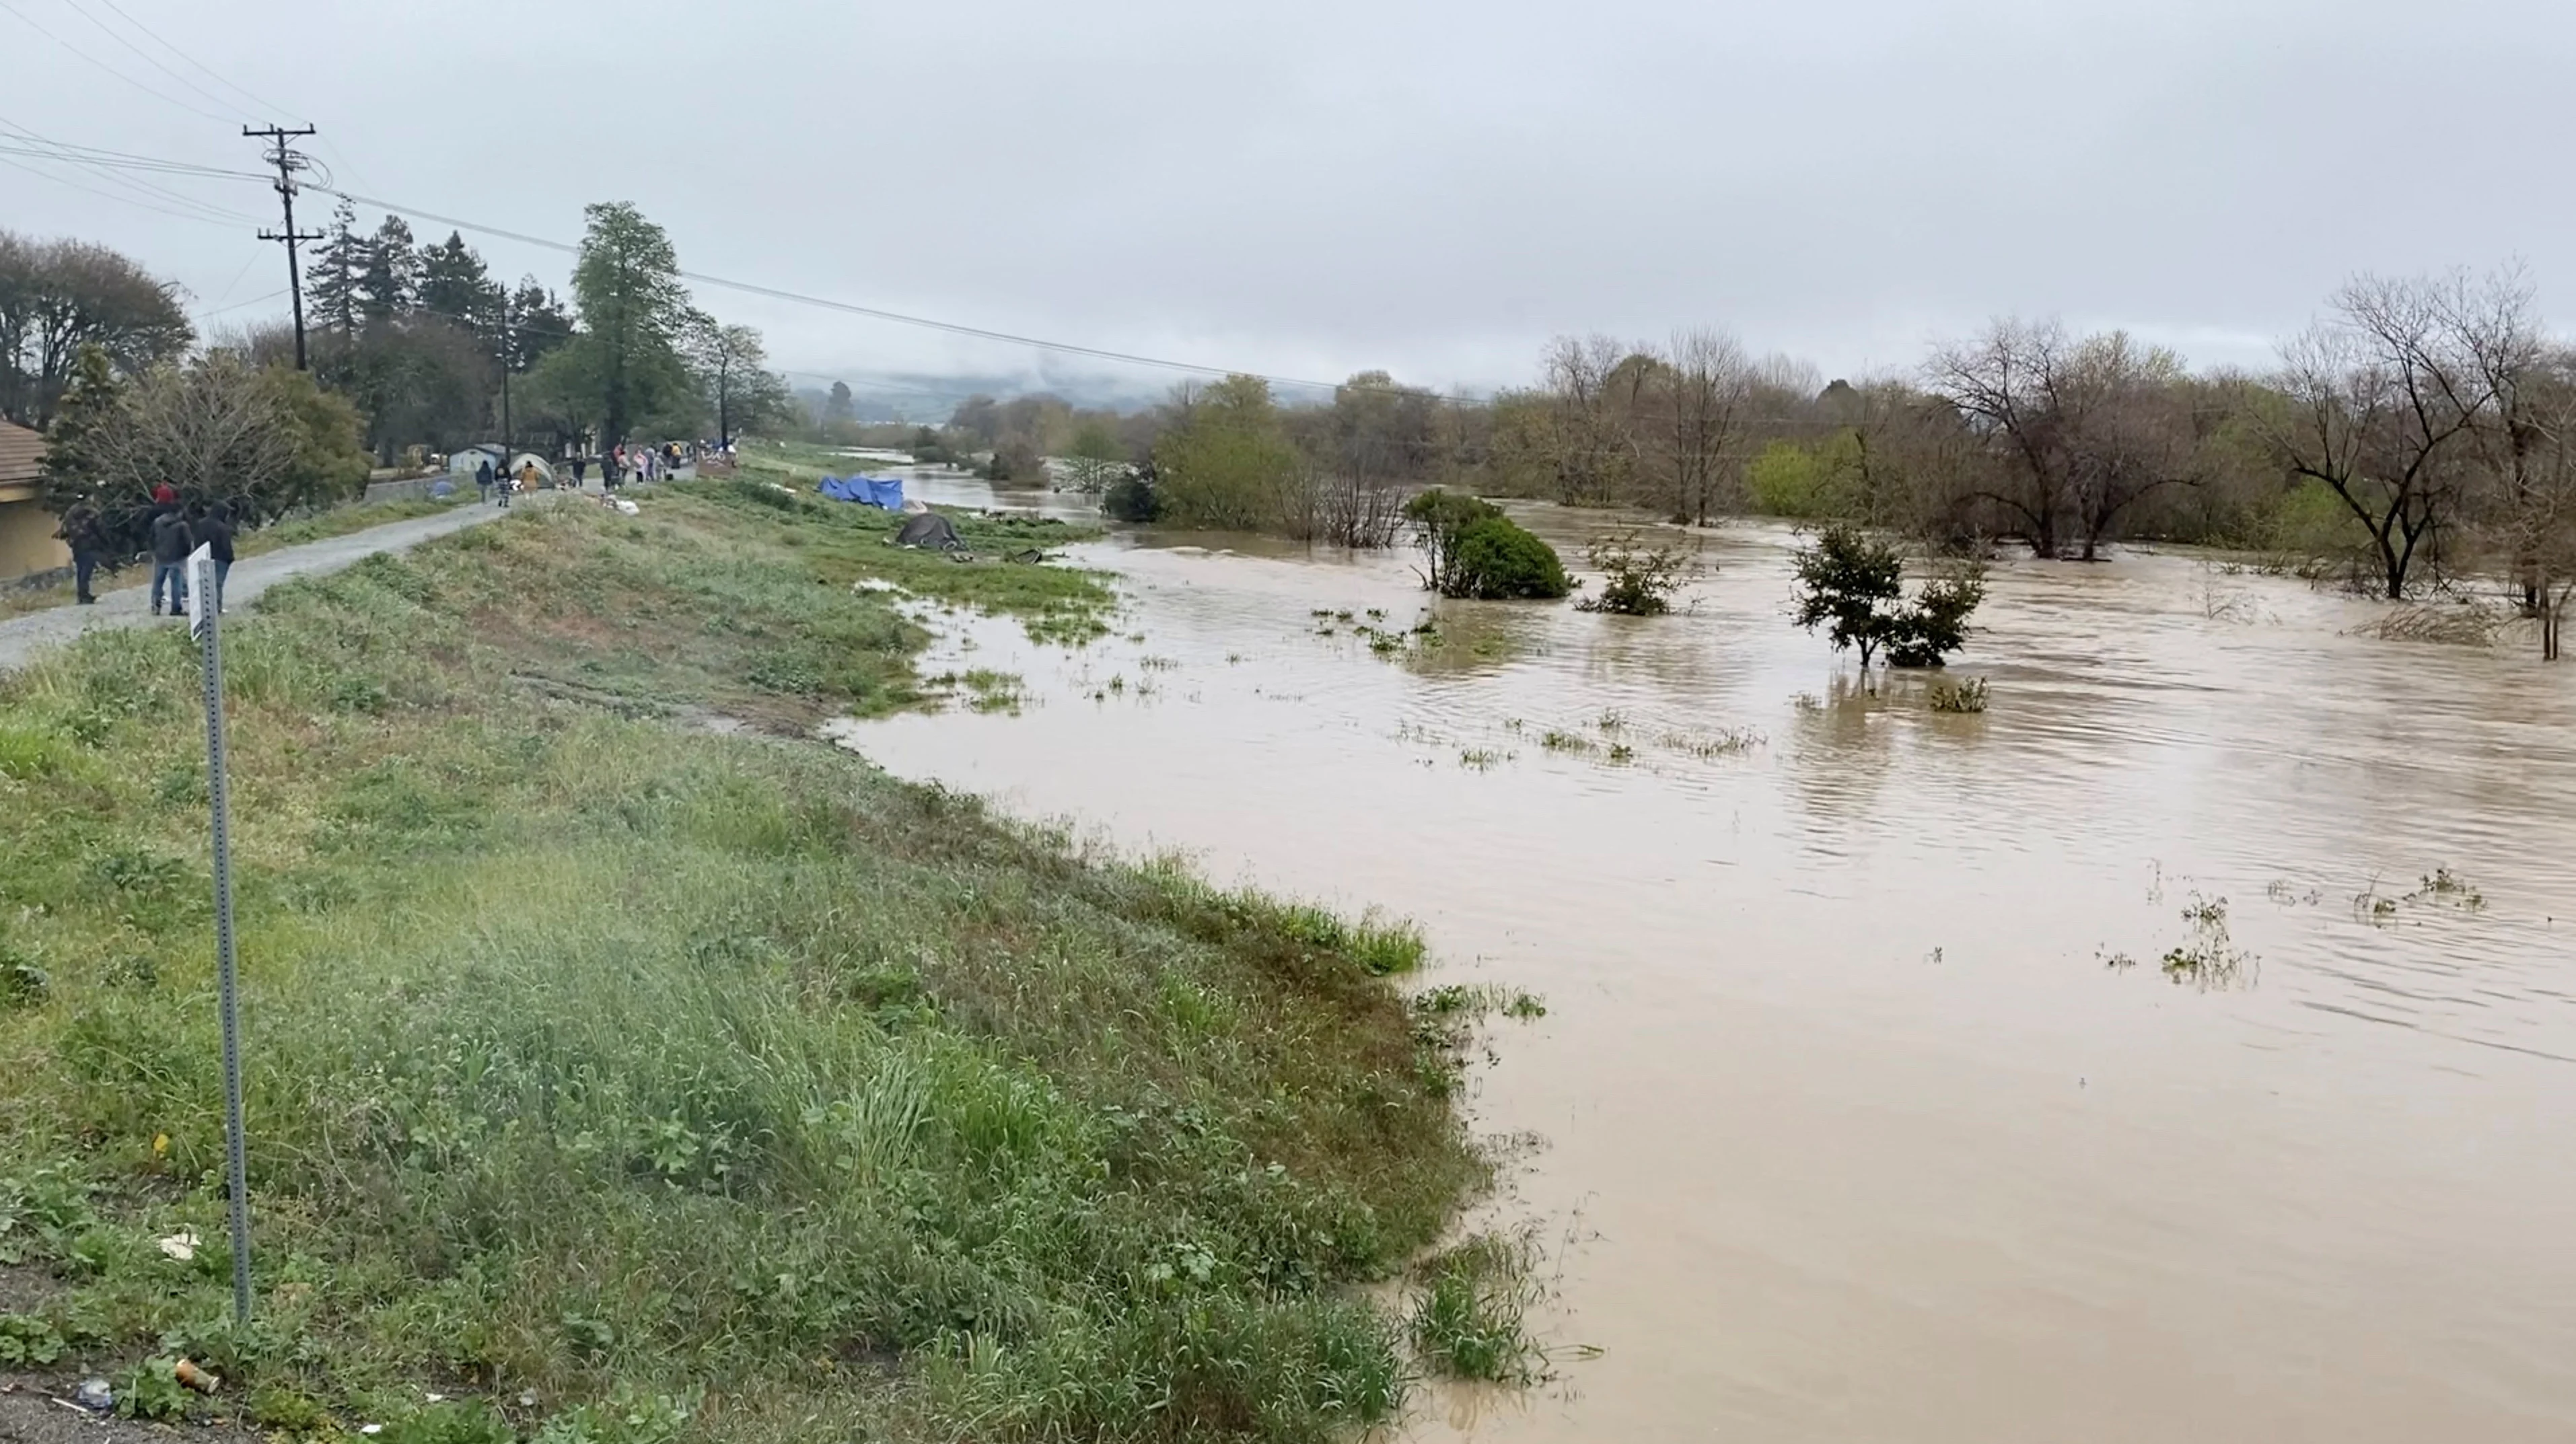 Reuters: A view shows the overflowing Pajaro River in Pajaro, California, U.S. March 11, 2023 in this screen grab obtained from a social media video. Twitter @BobbieGrennier/via REUTERS